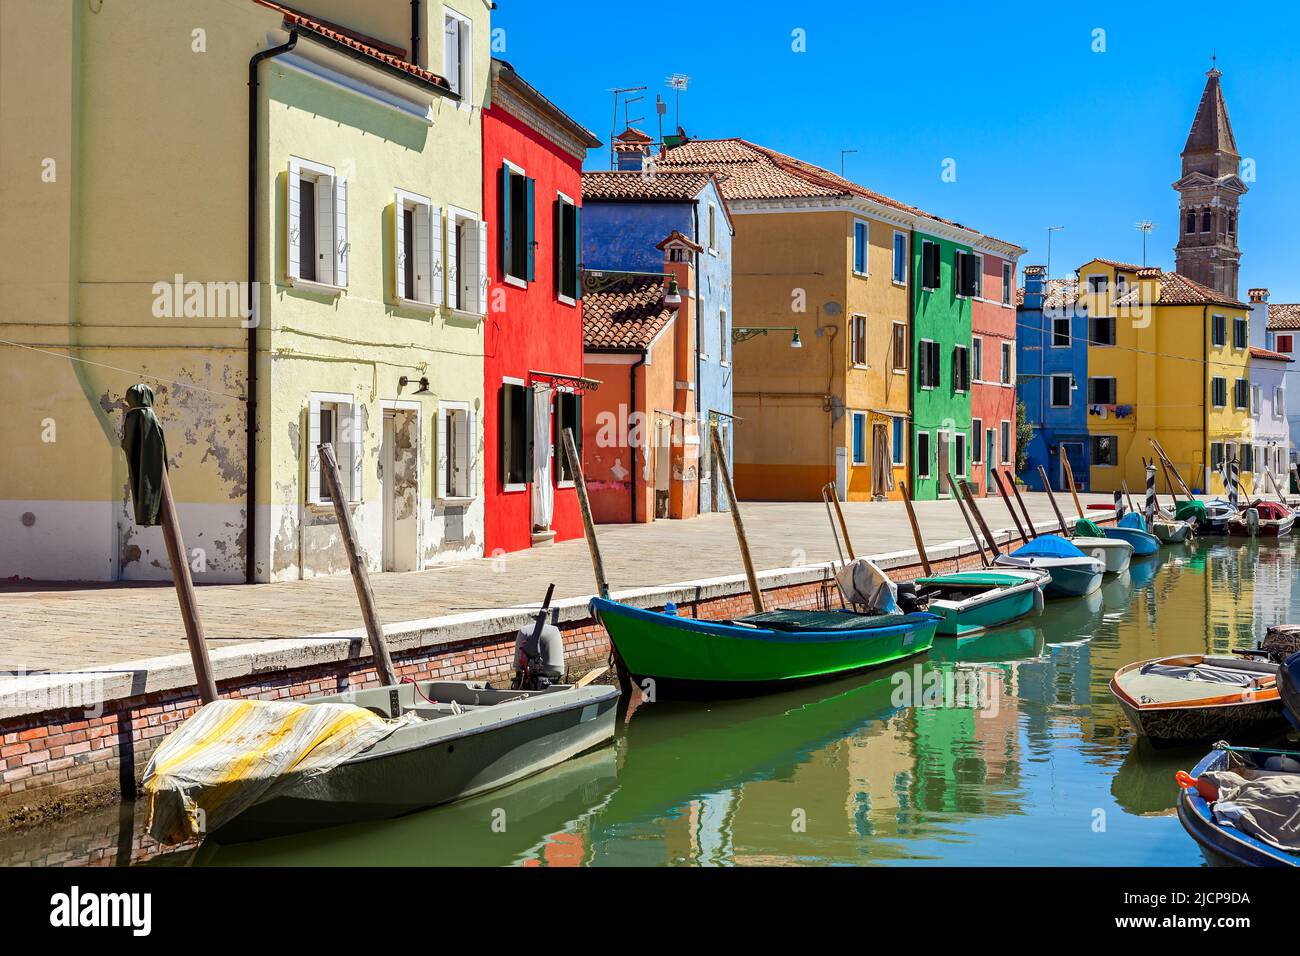 View of boats on narrow canal and colorful houses under blue sky in Burano, Italy. Stock Photo